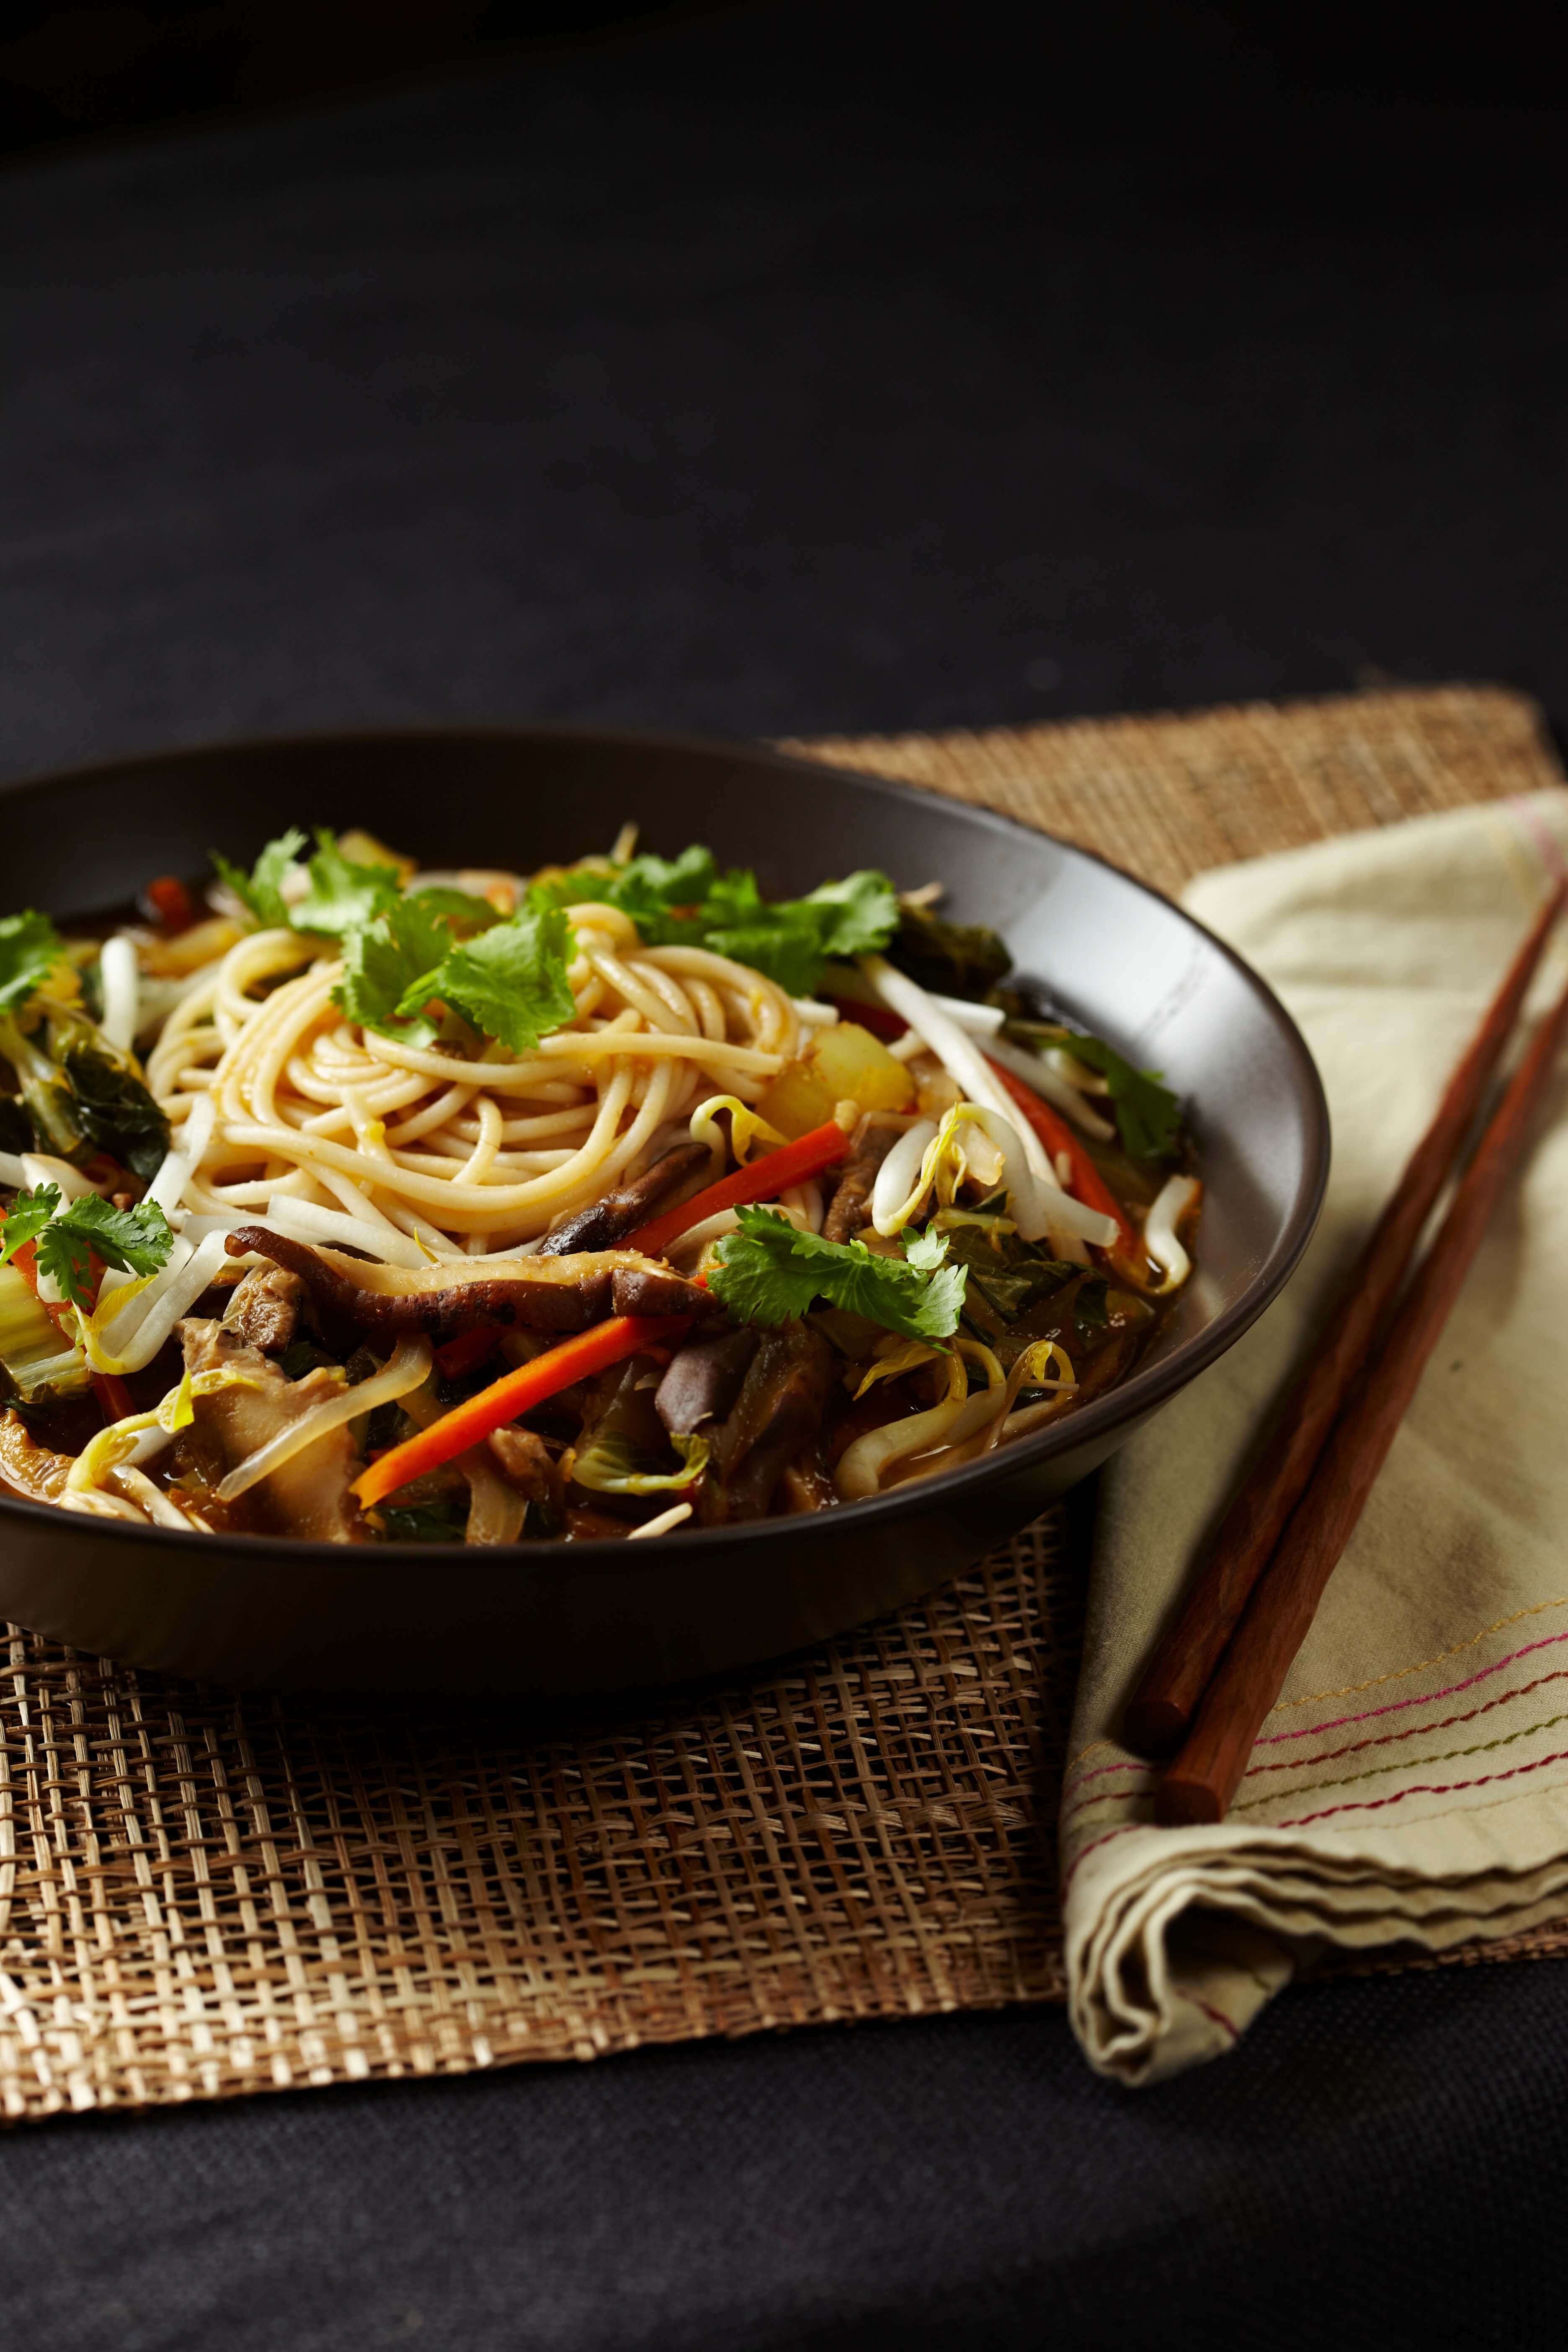 This delicious Thai noodle soup is a great one-pot meal that makes serving dinner a snap.